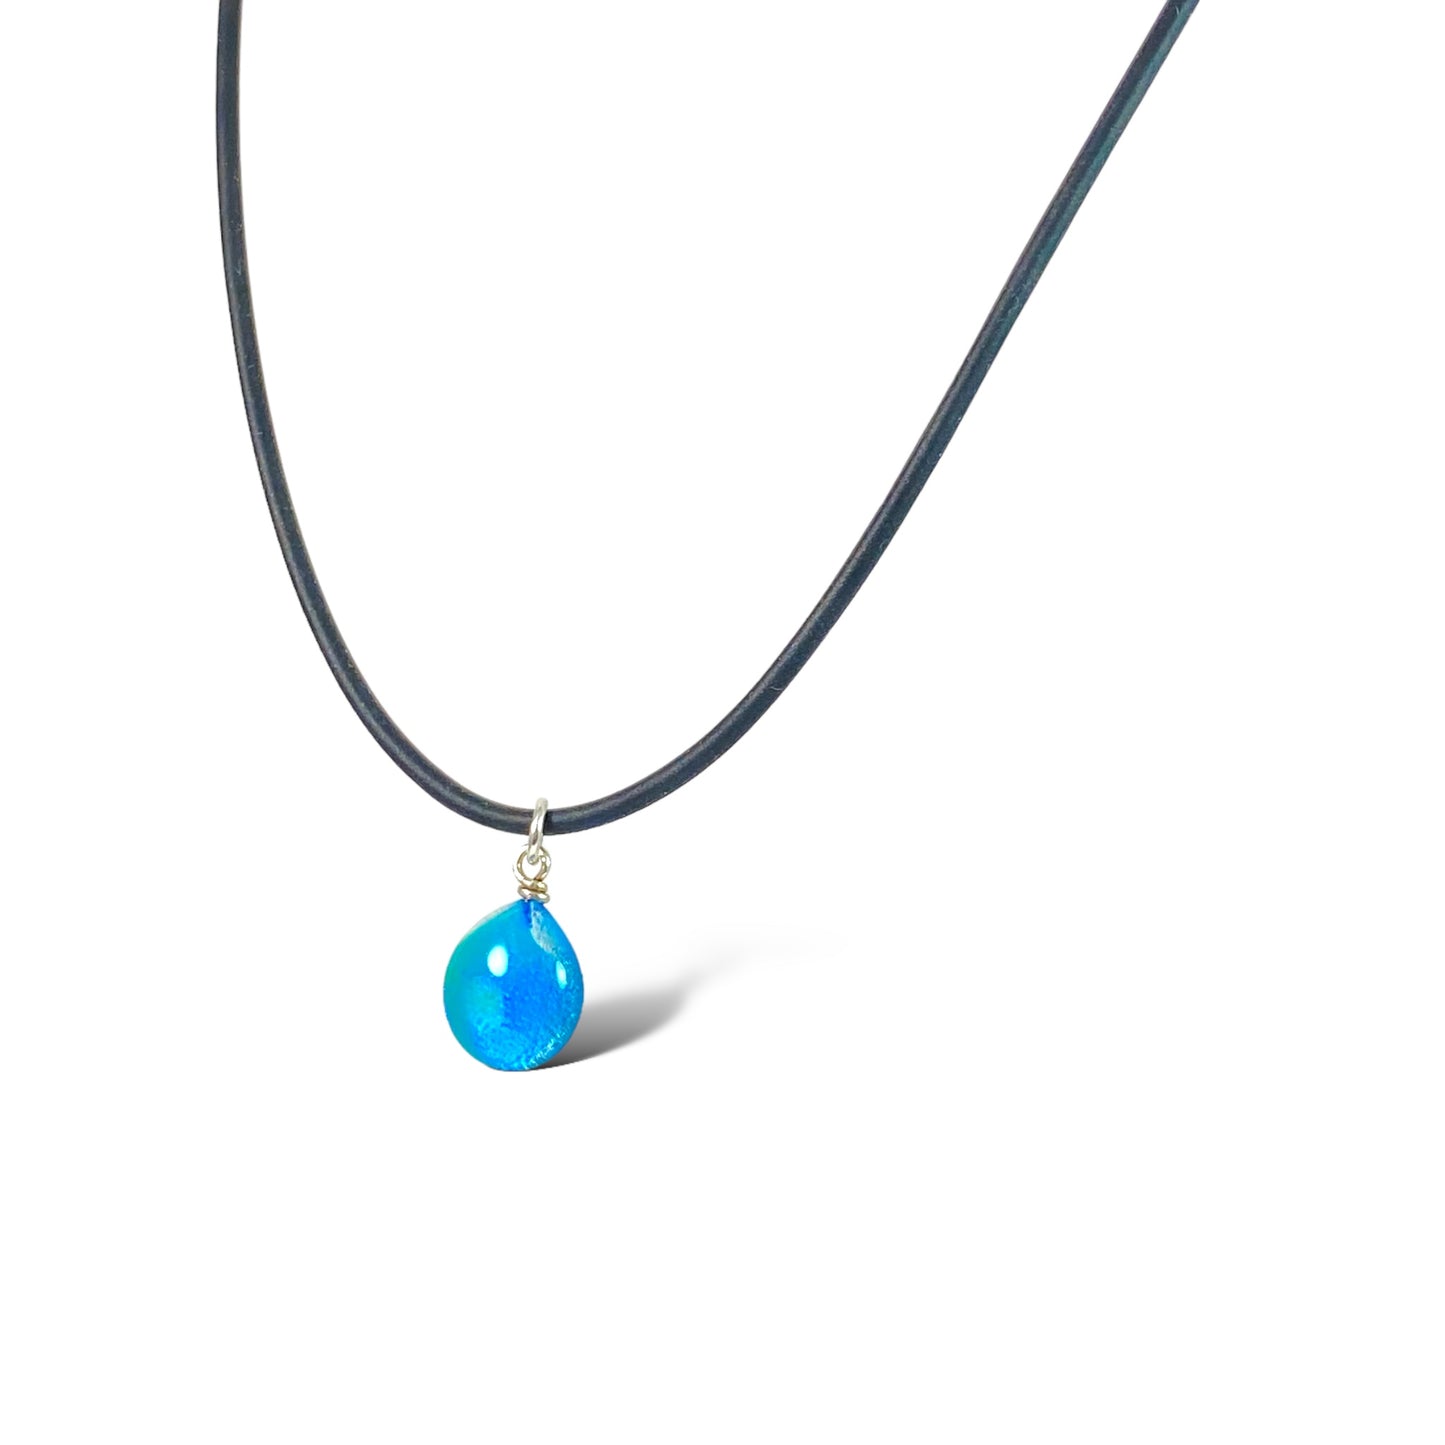 Space Ball Necklace in Turquoise